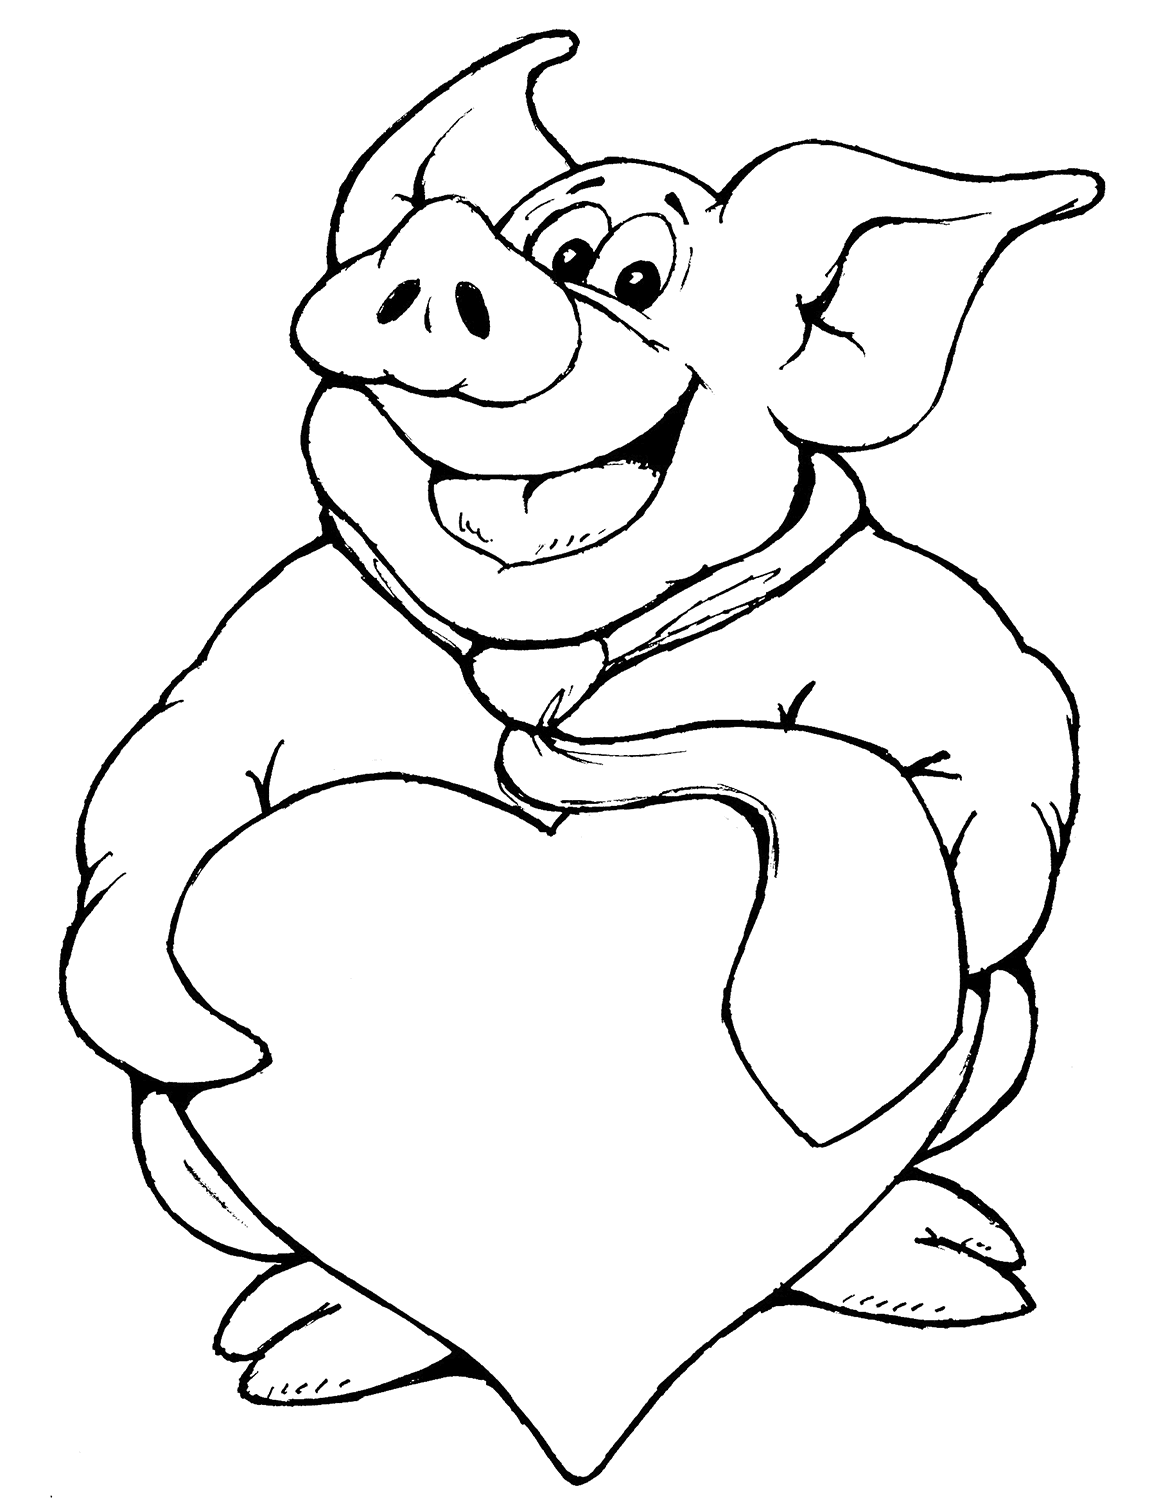 Pig With Heart Coloring Page